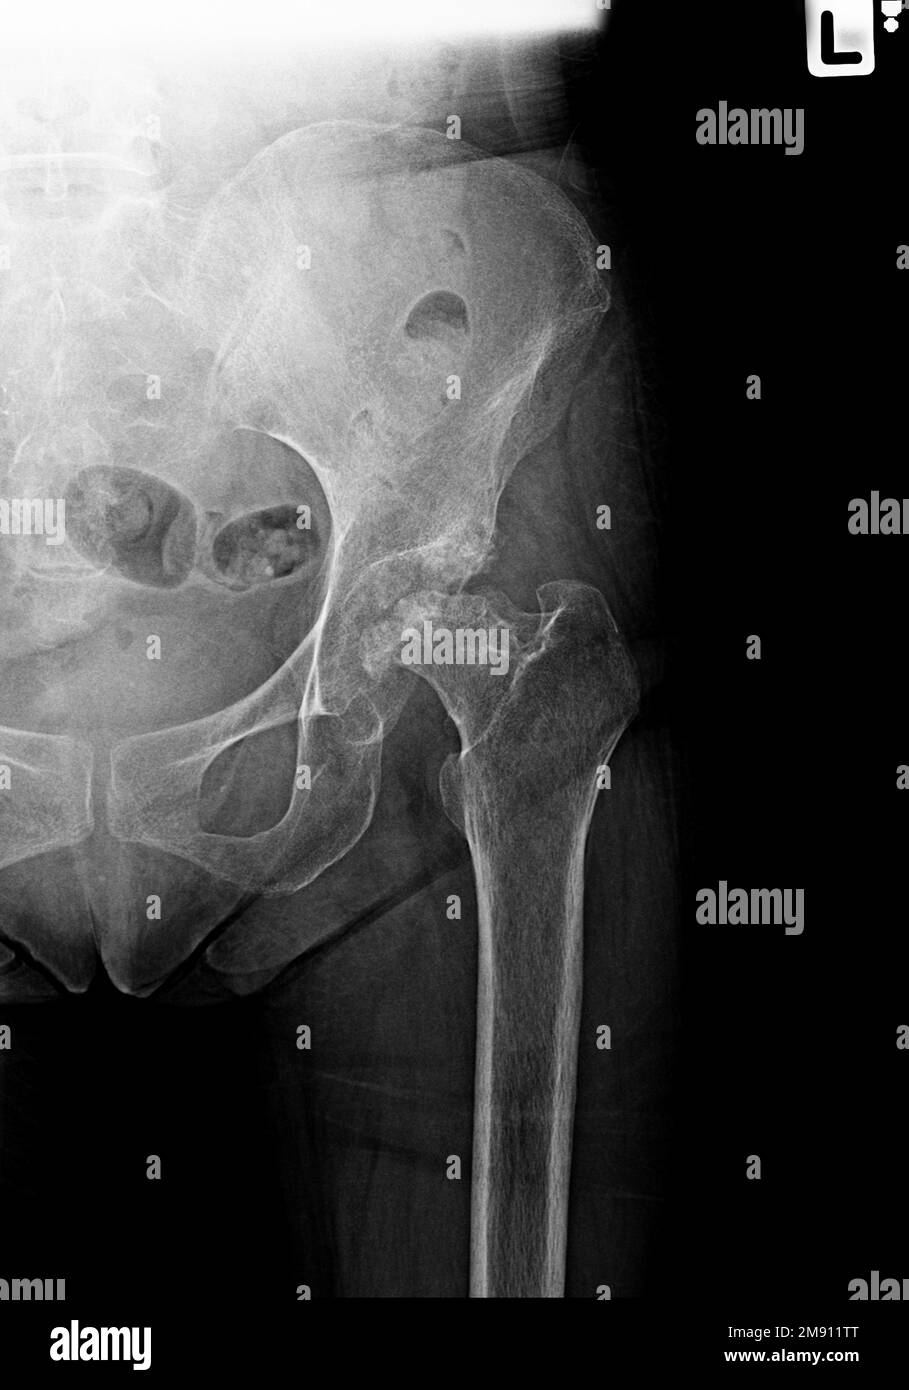 Film x-ray facture hip joints, fracture neck of femur Stock Photo